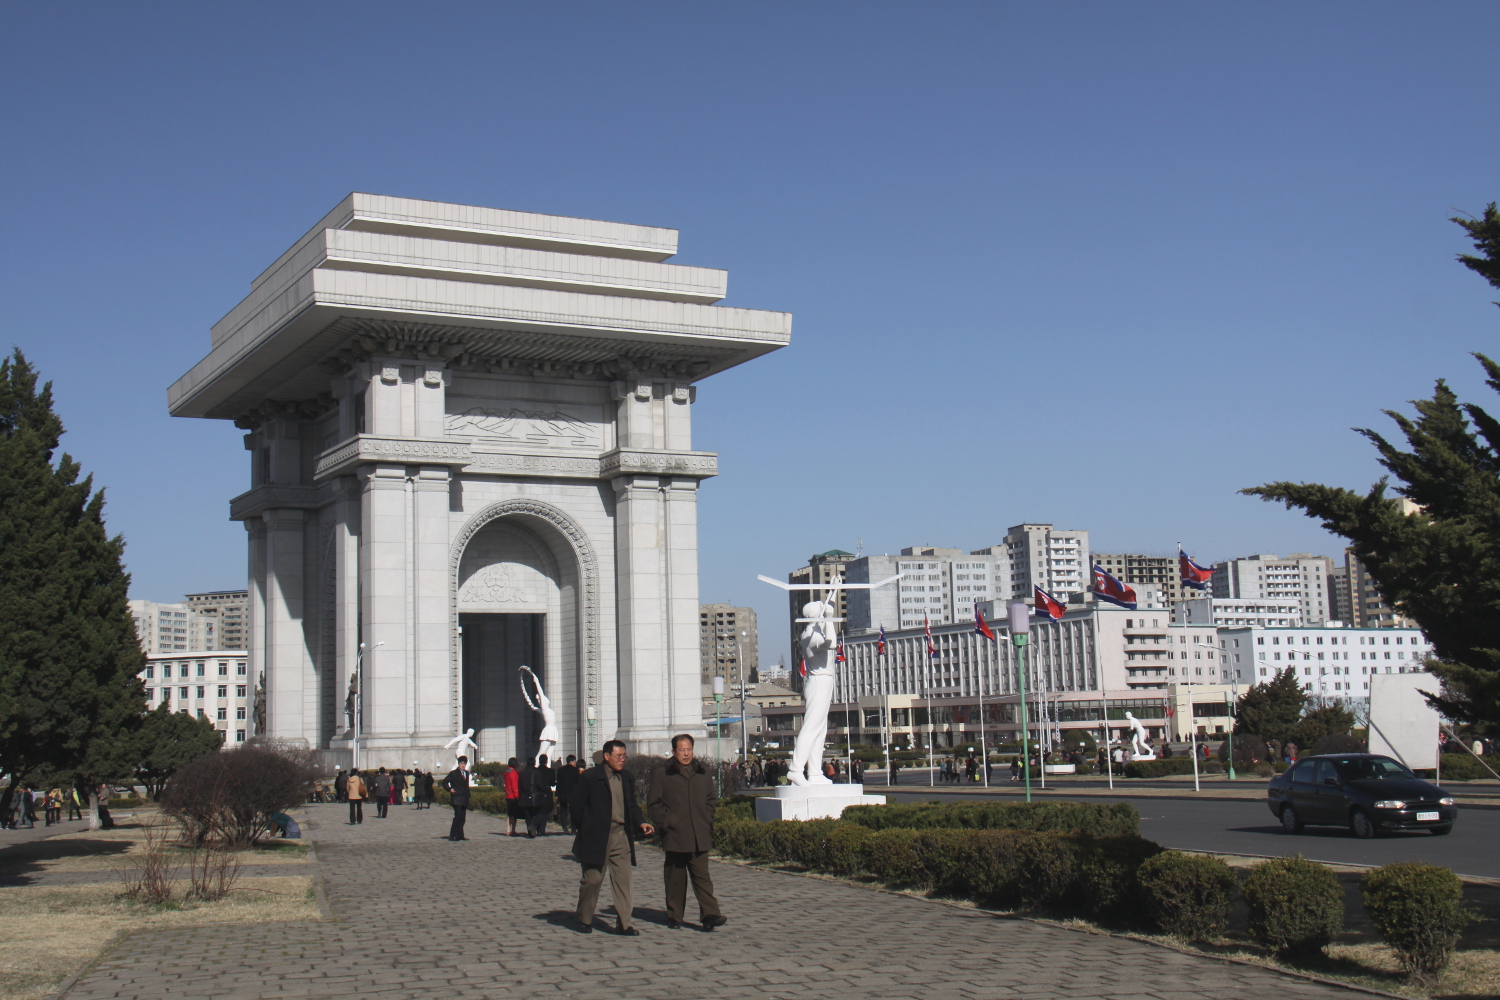 Pyongyang's Triumphal Arch is dedicated to the end of Japanese occupation in 1945. Image by Lonely Planet